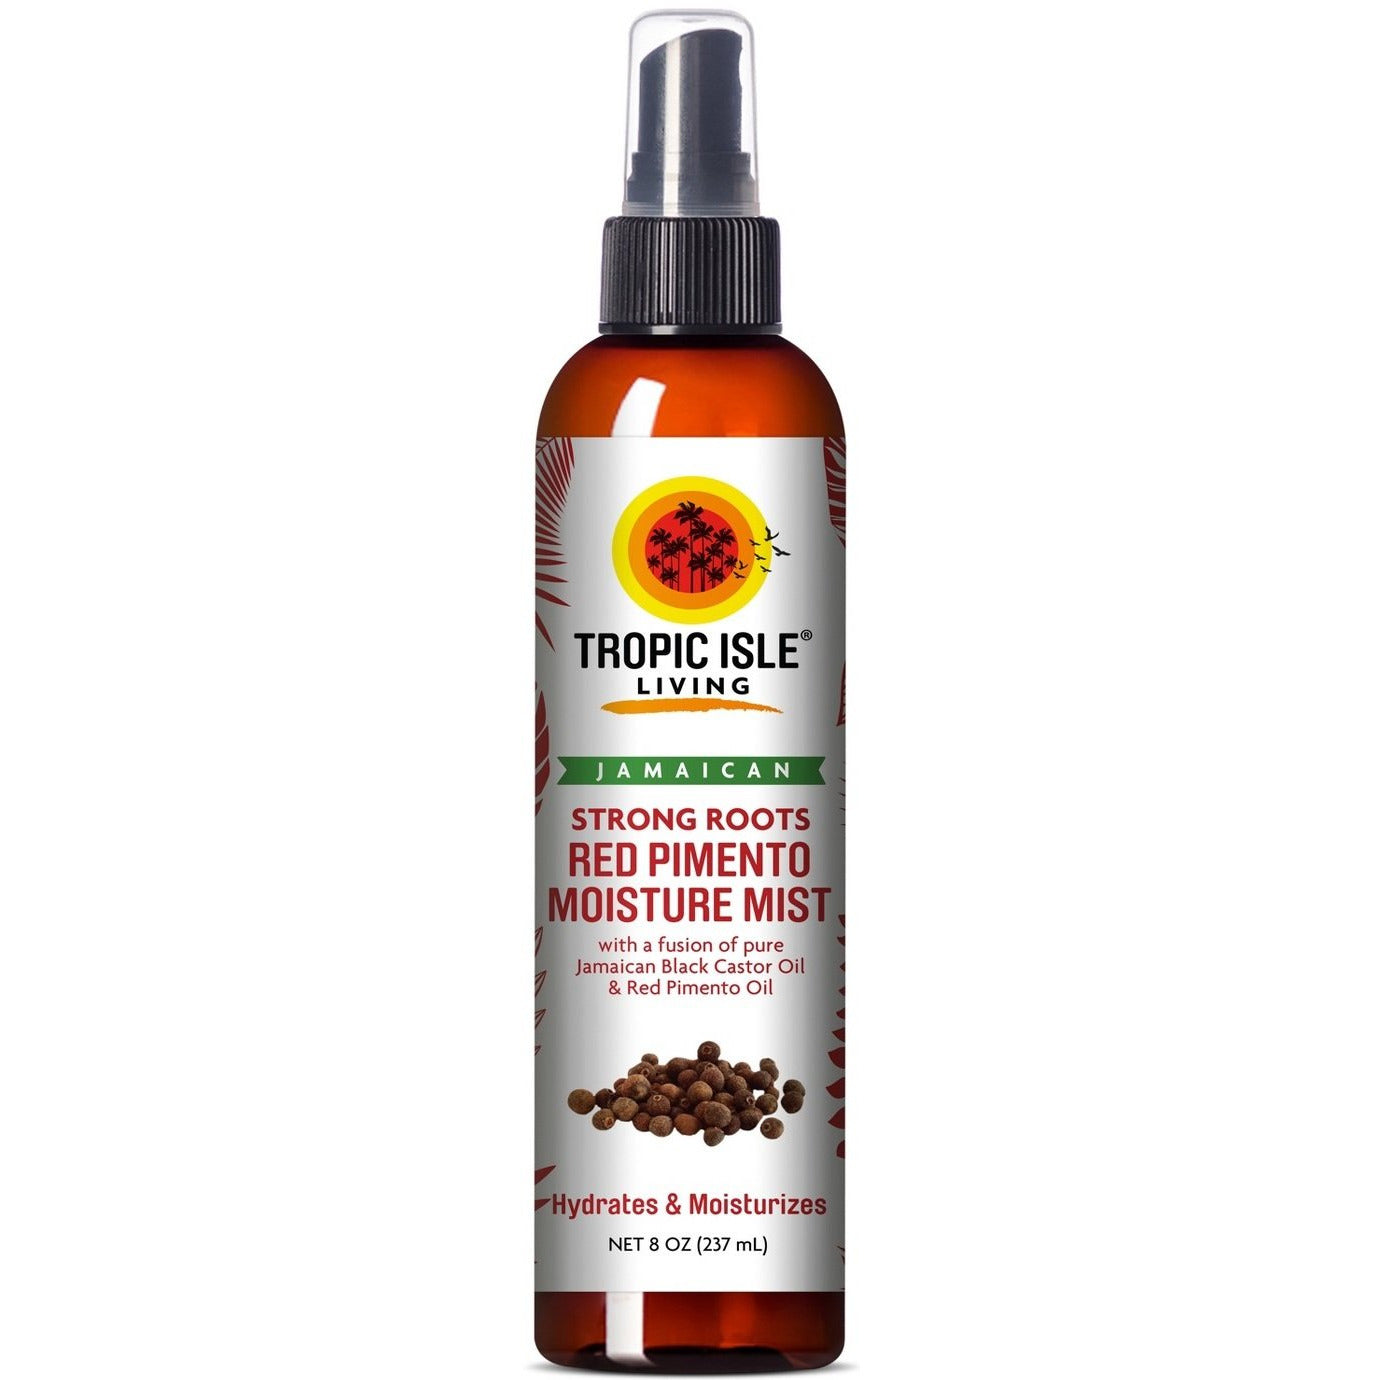 4th Ave Market: Tropic Isle Living Jamaican Strong Roots Red Pimento Moisture Mist - 8oz